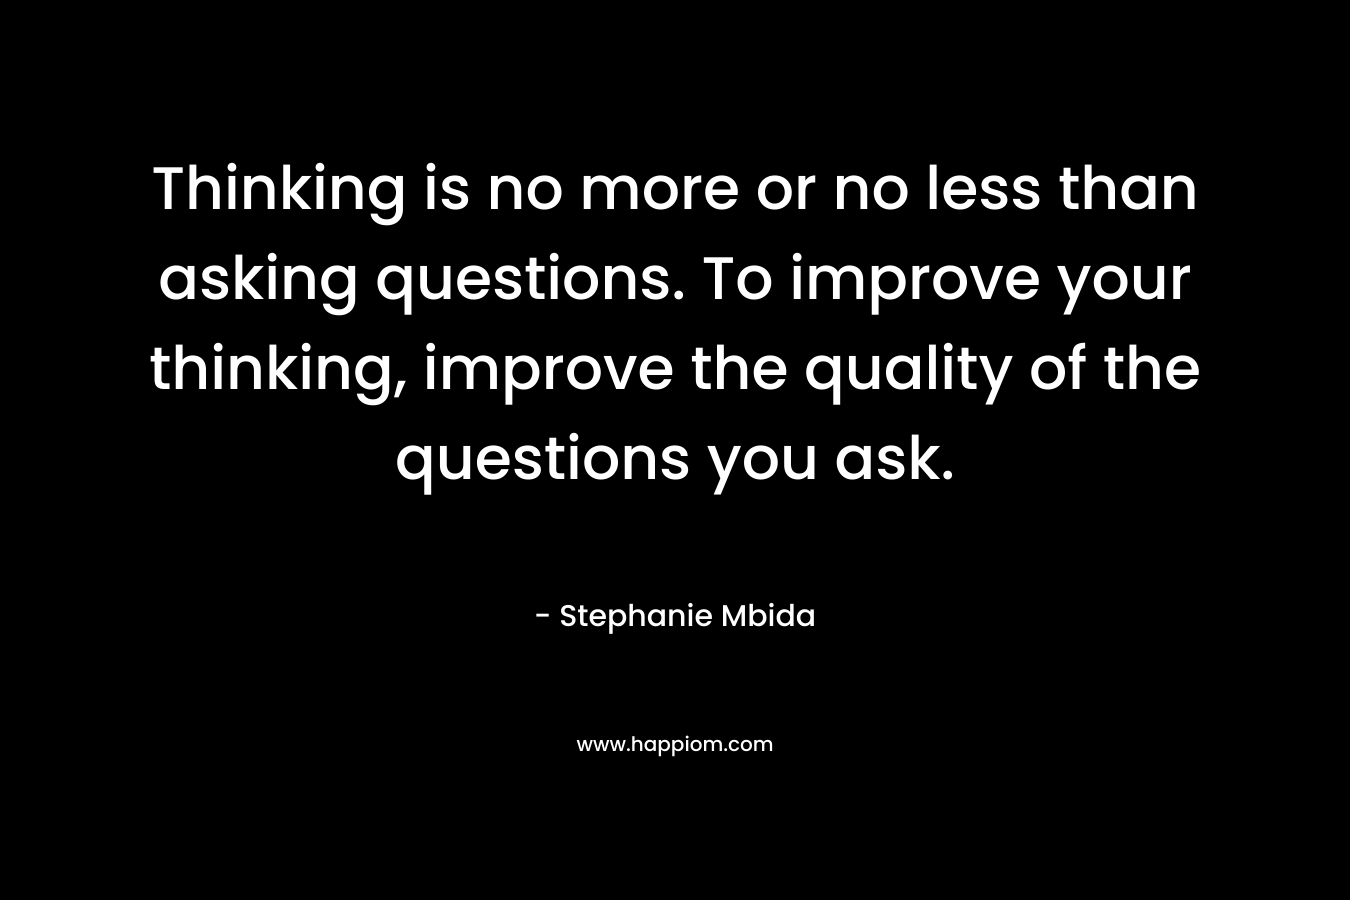 Thinking is no more or no less than asking questions. To improve your thinking, improve the quality of the questions you ask.